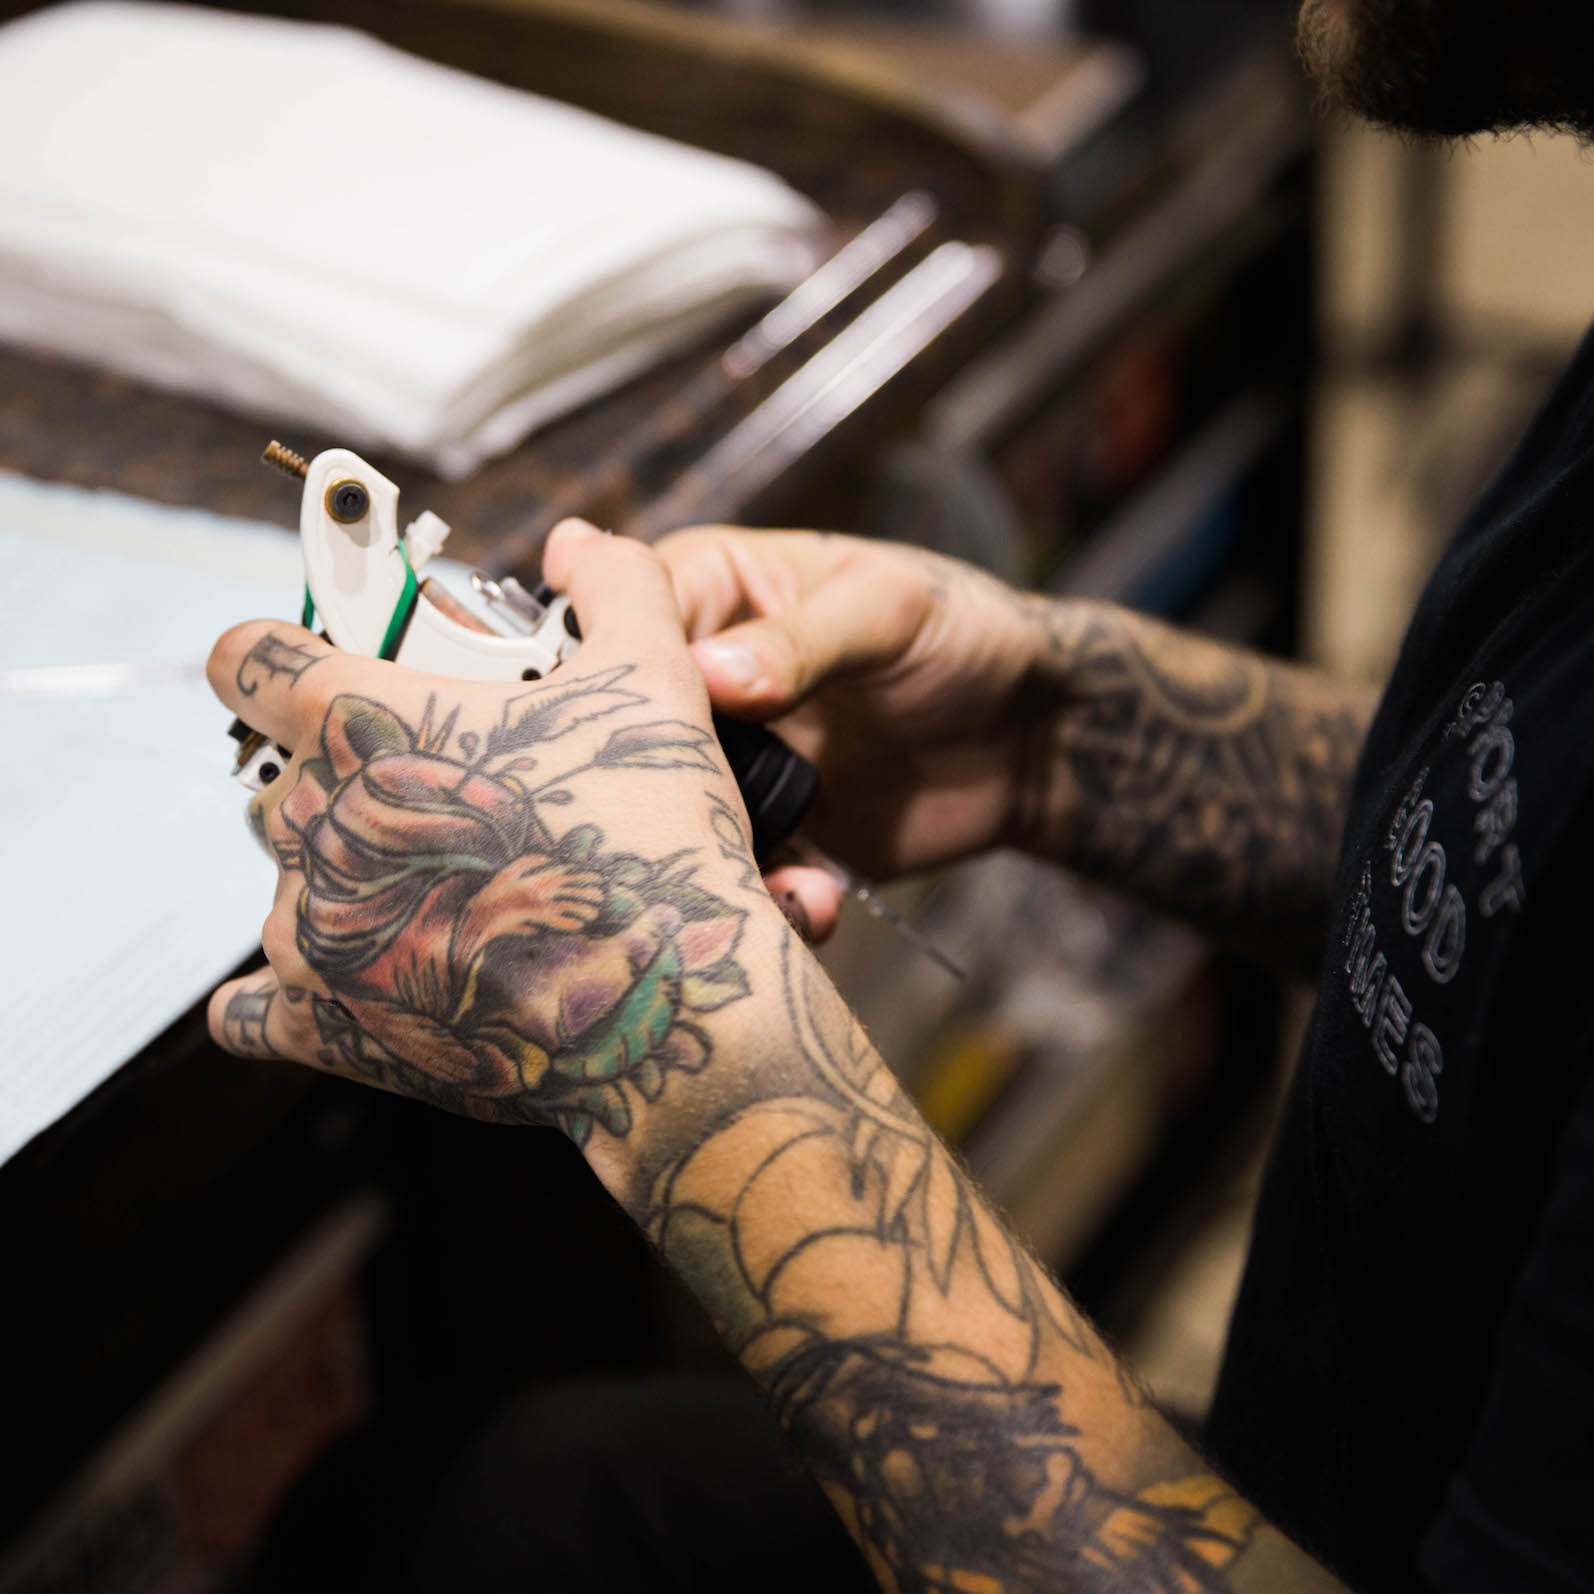 Our Beginner's Guide to Getting a Tattoo - What to Know